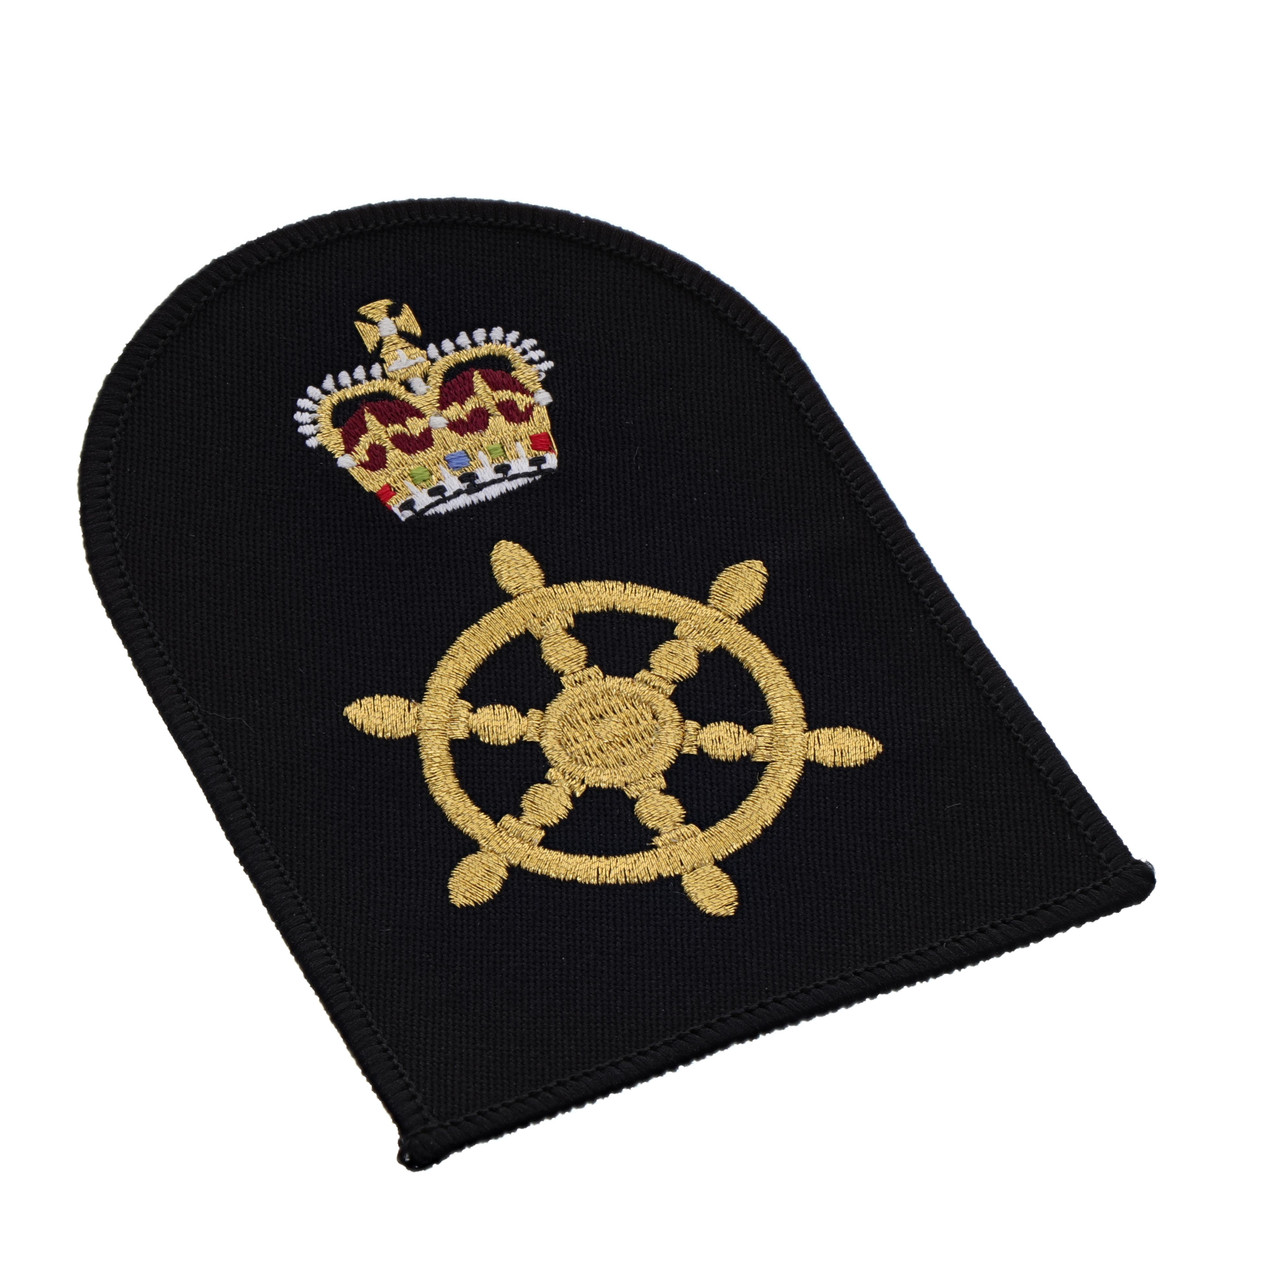 Naval Police Coxswain Petty Officer Badge - Navy Shop